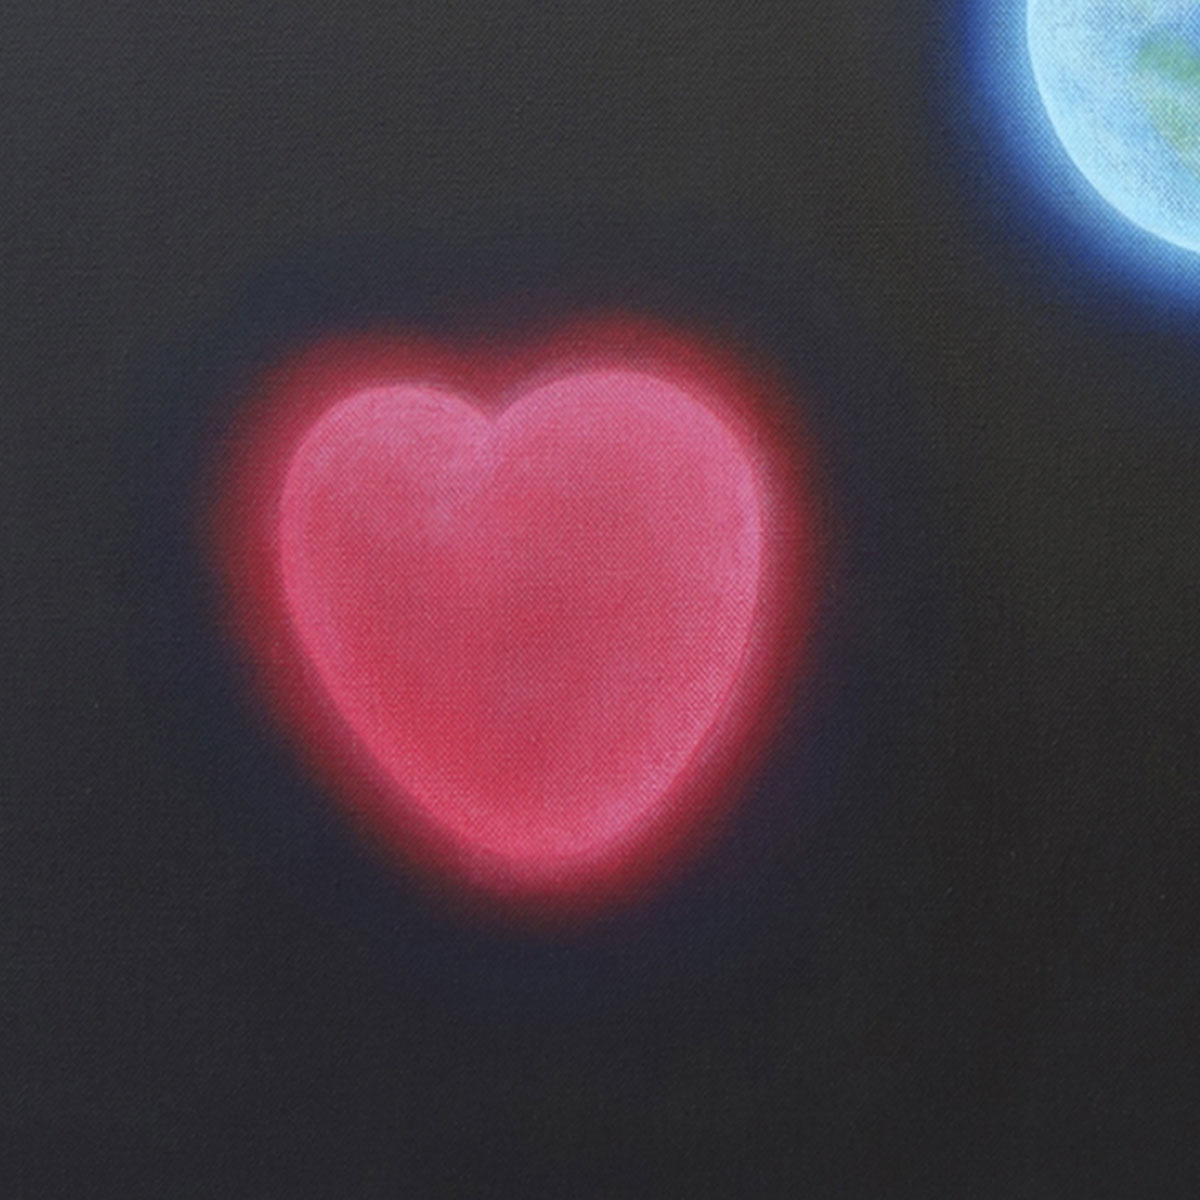 Red heart and blue planet earth against a black background